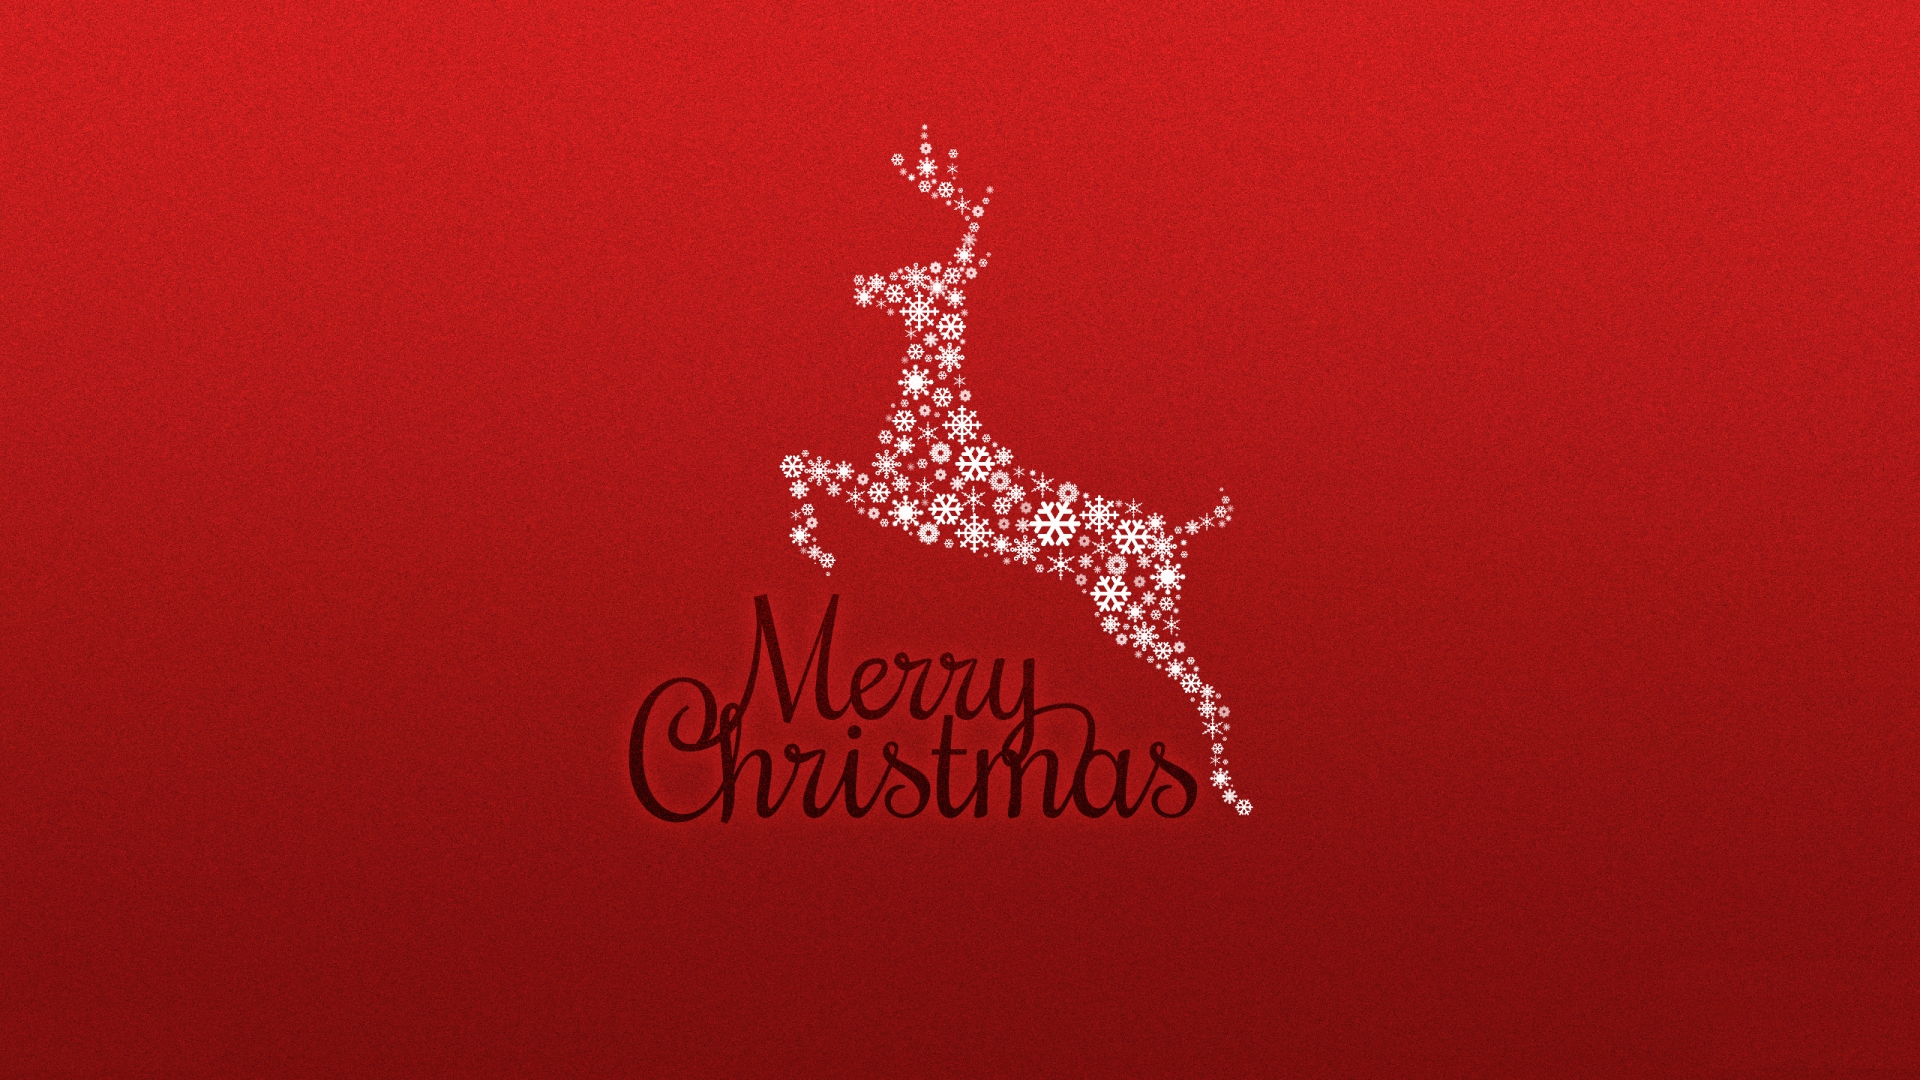 Merry Christmas Red Card for 1920 x 1080 HDTV 1080p resolution